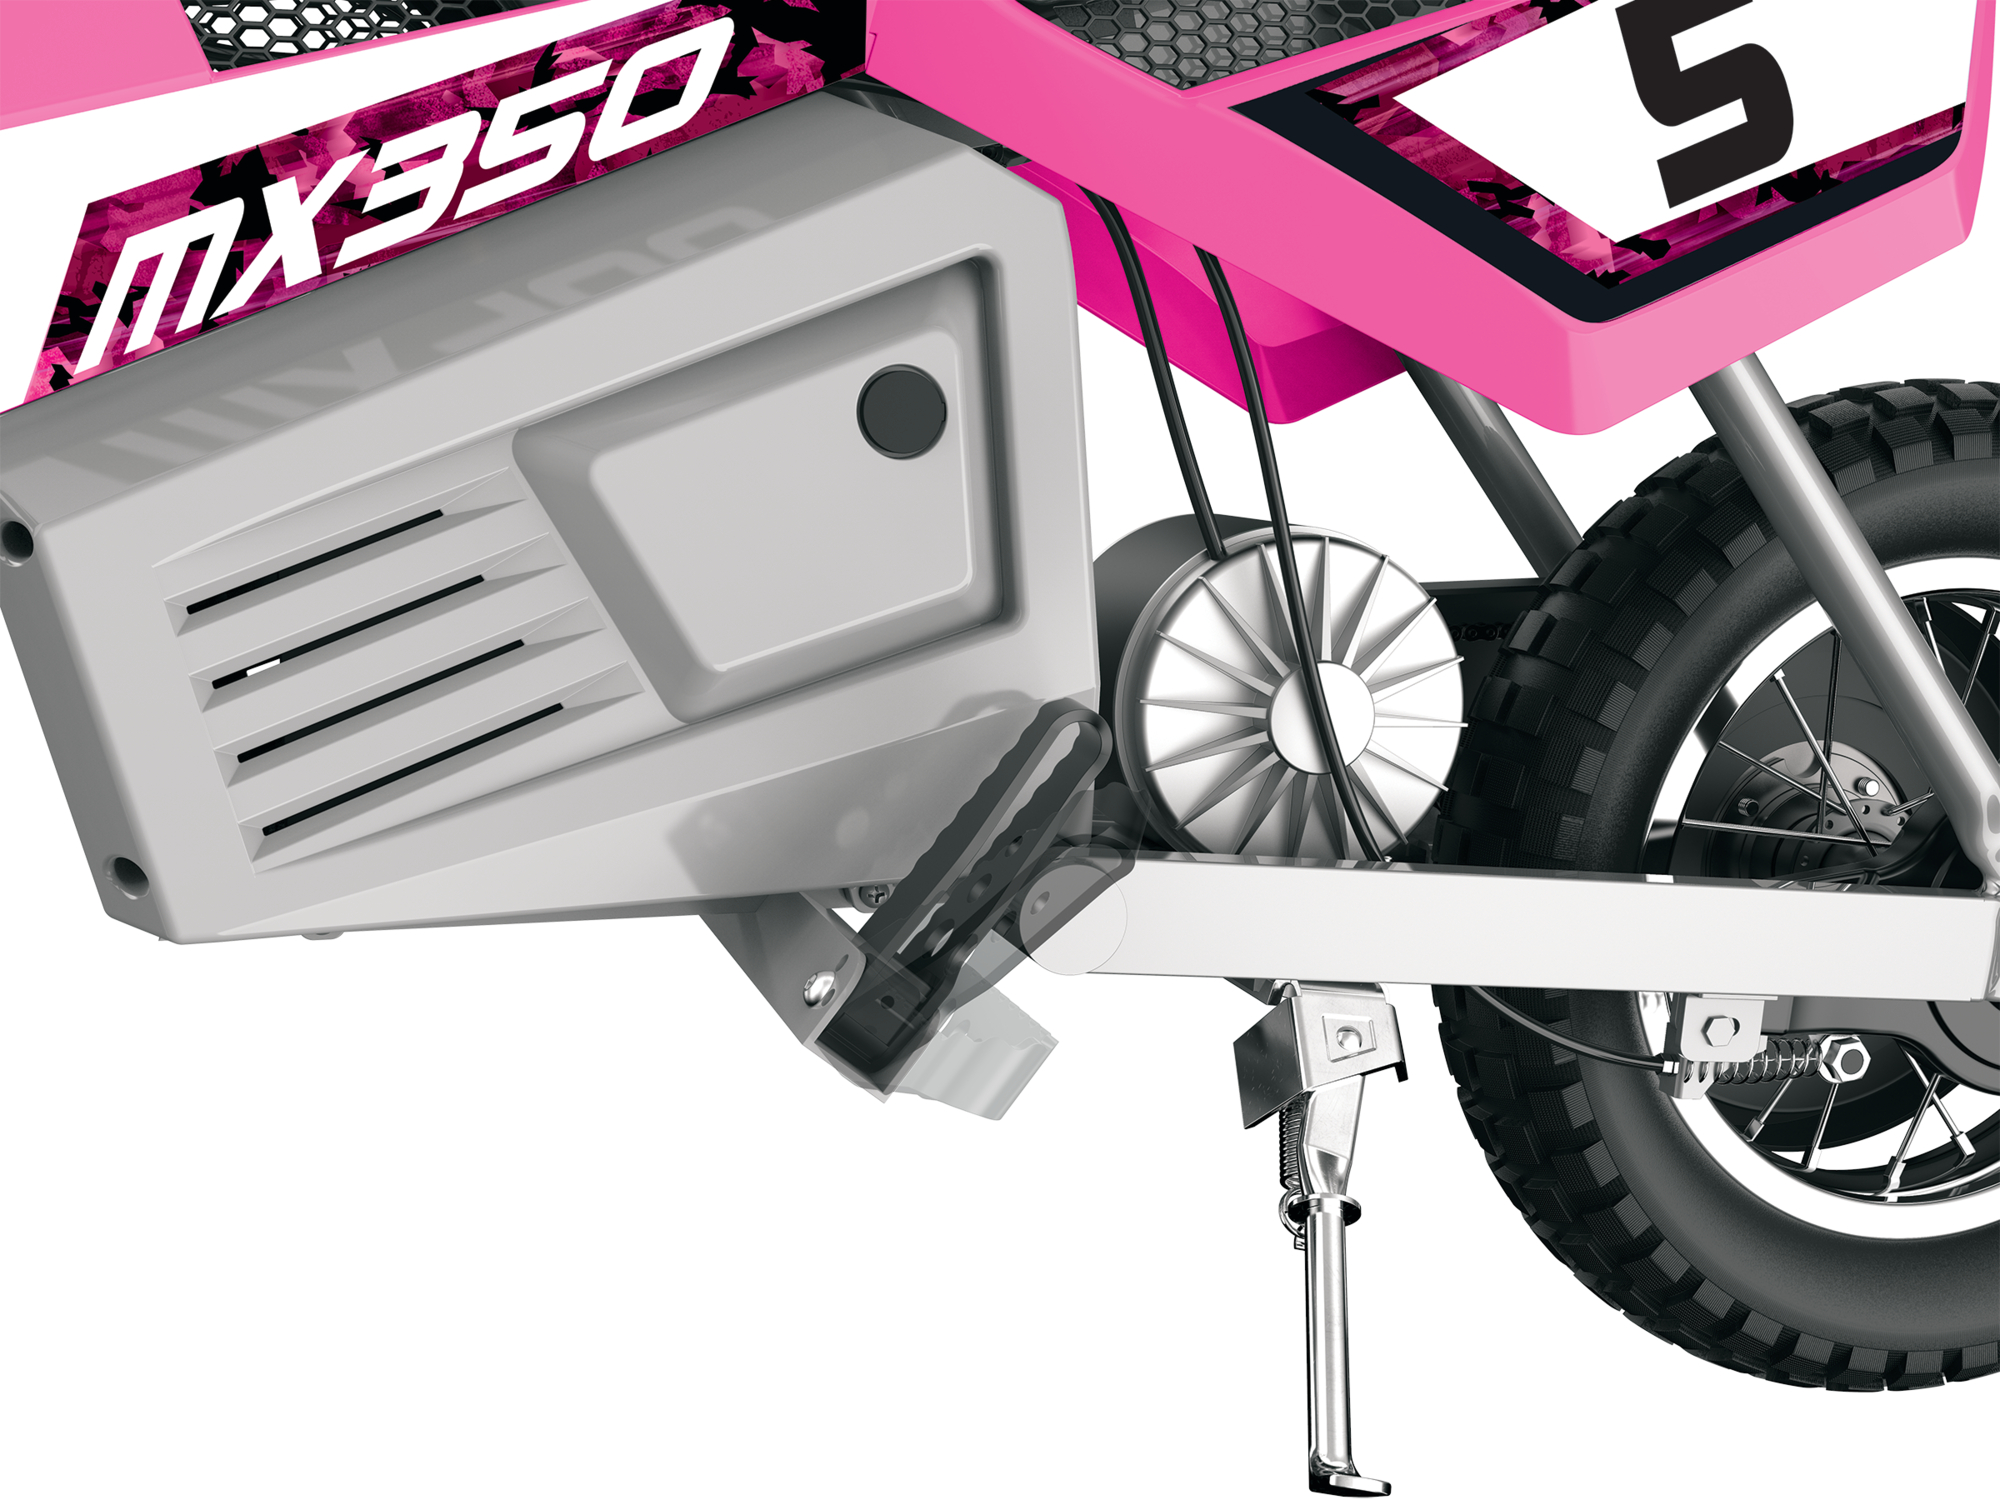 Razor Dirt Rocket MX350 - Pink, up to 14 mph, 24V Electric-Powered Dirt Bike for Kids 13+ - image 5 of 10